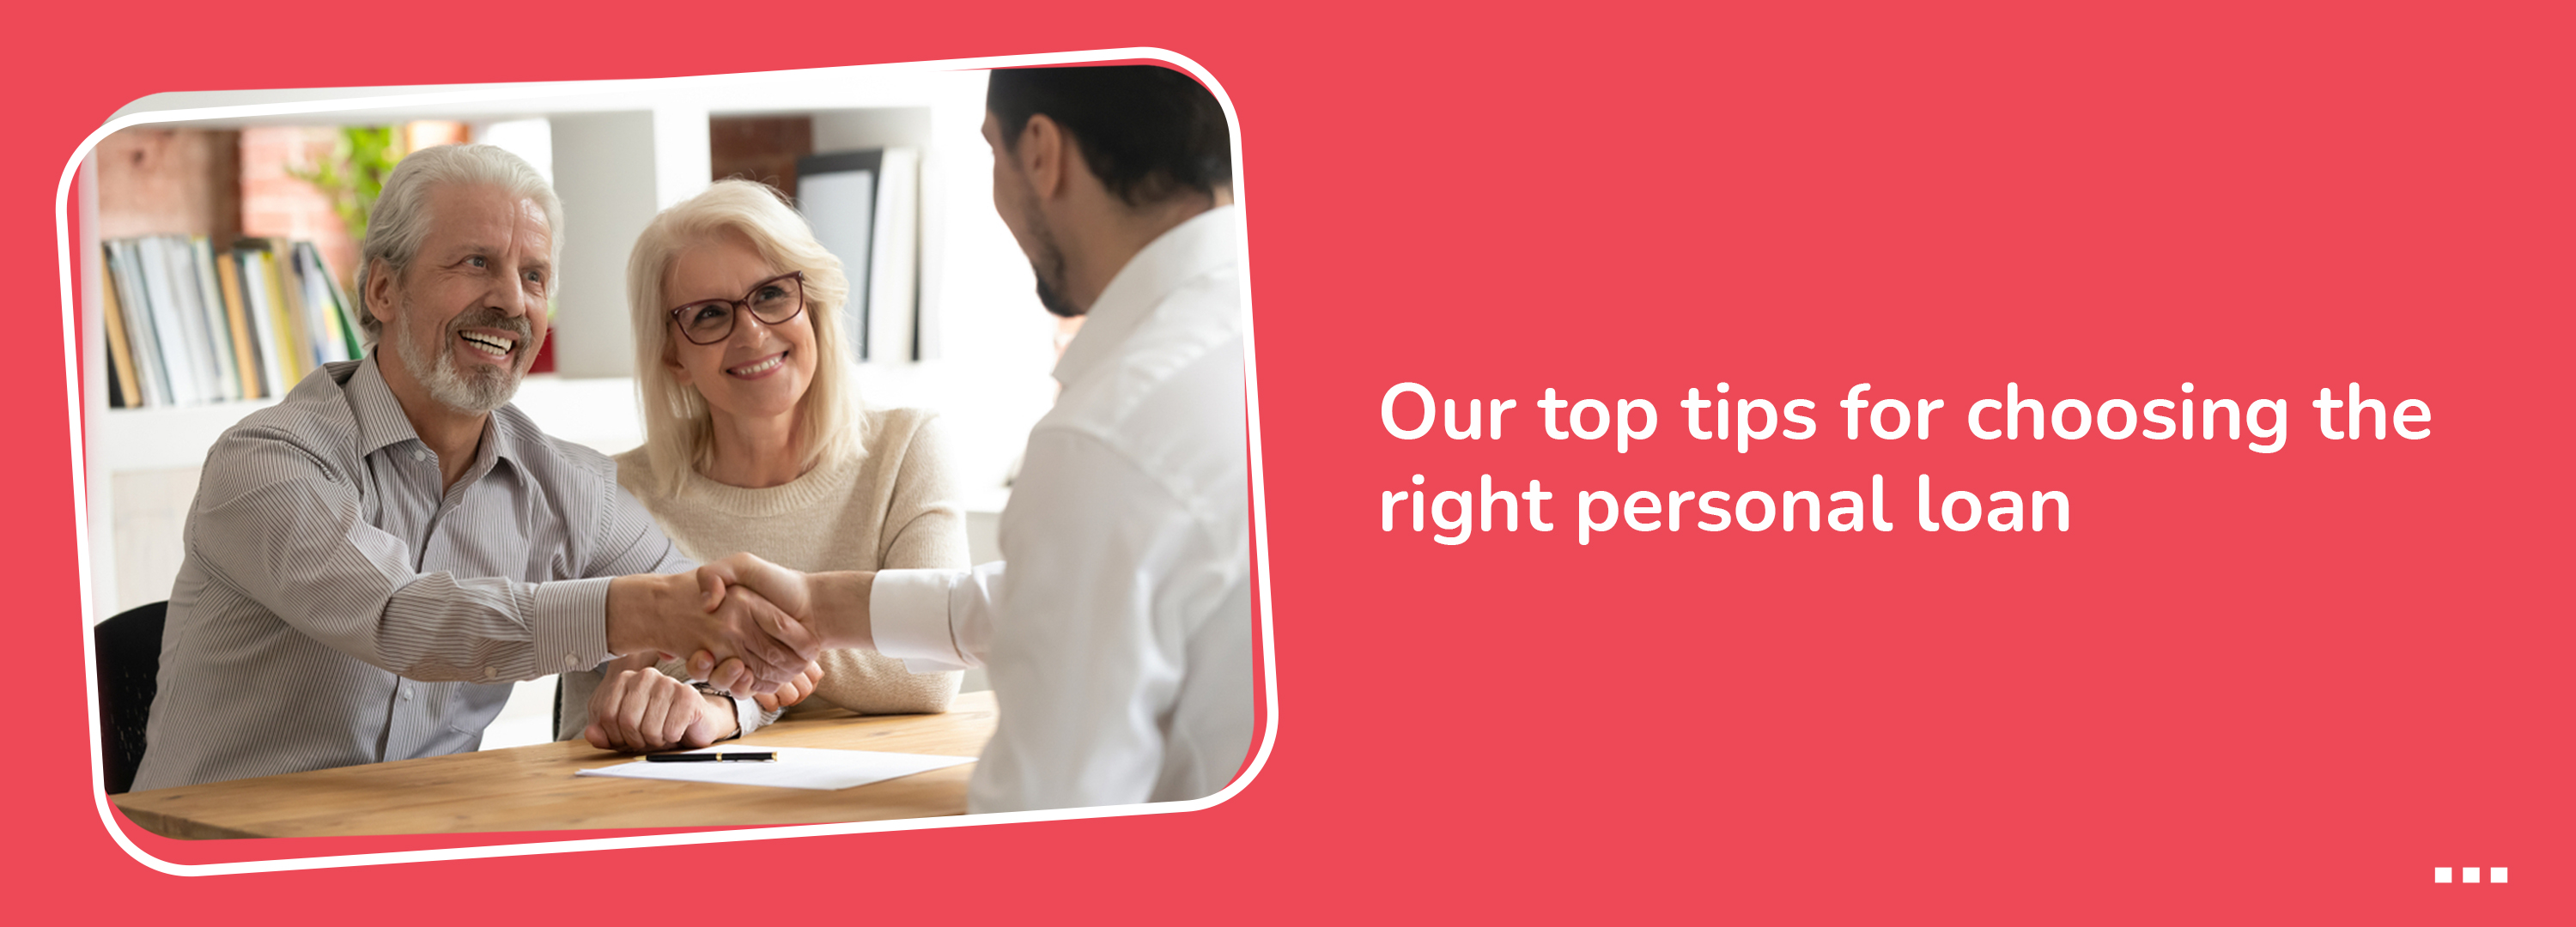 Our top tips for choosing the right personal loan